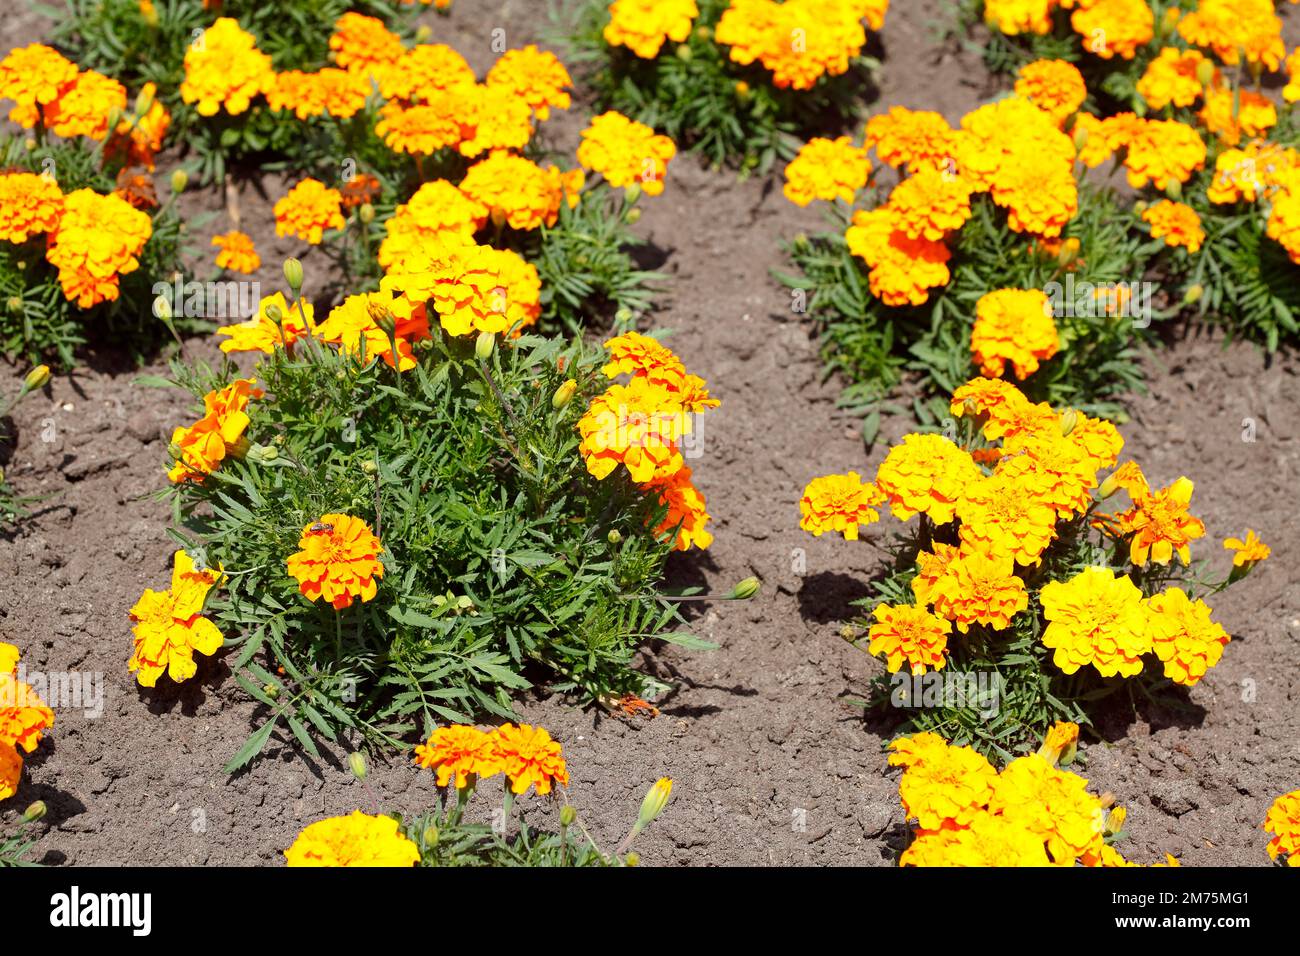 Yellow marigolds on a flower bed, Germany Stock Photo